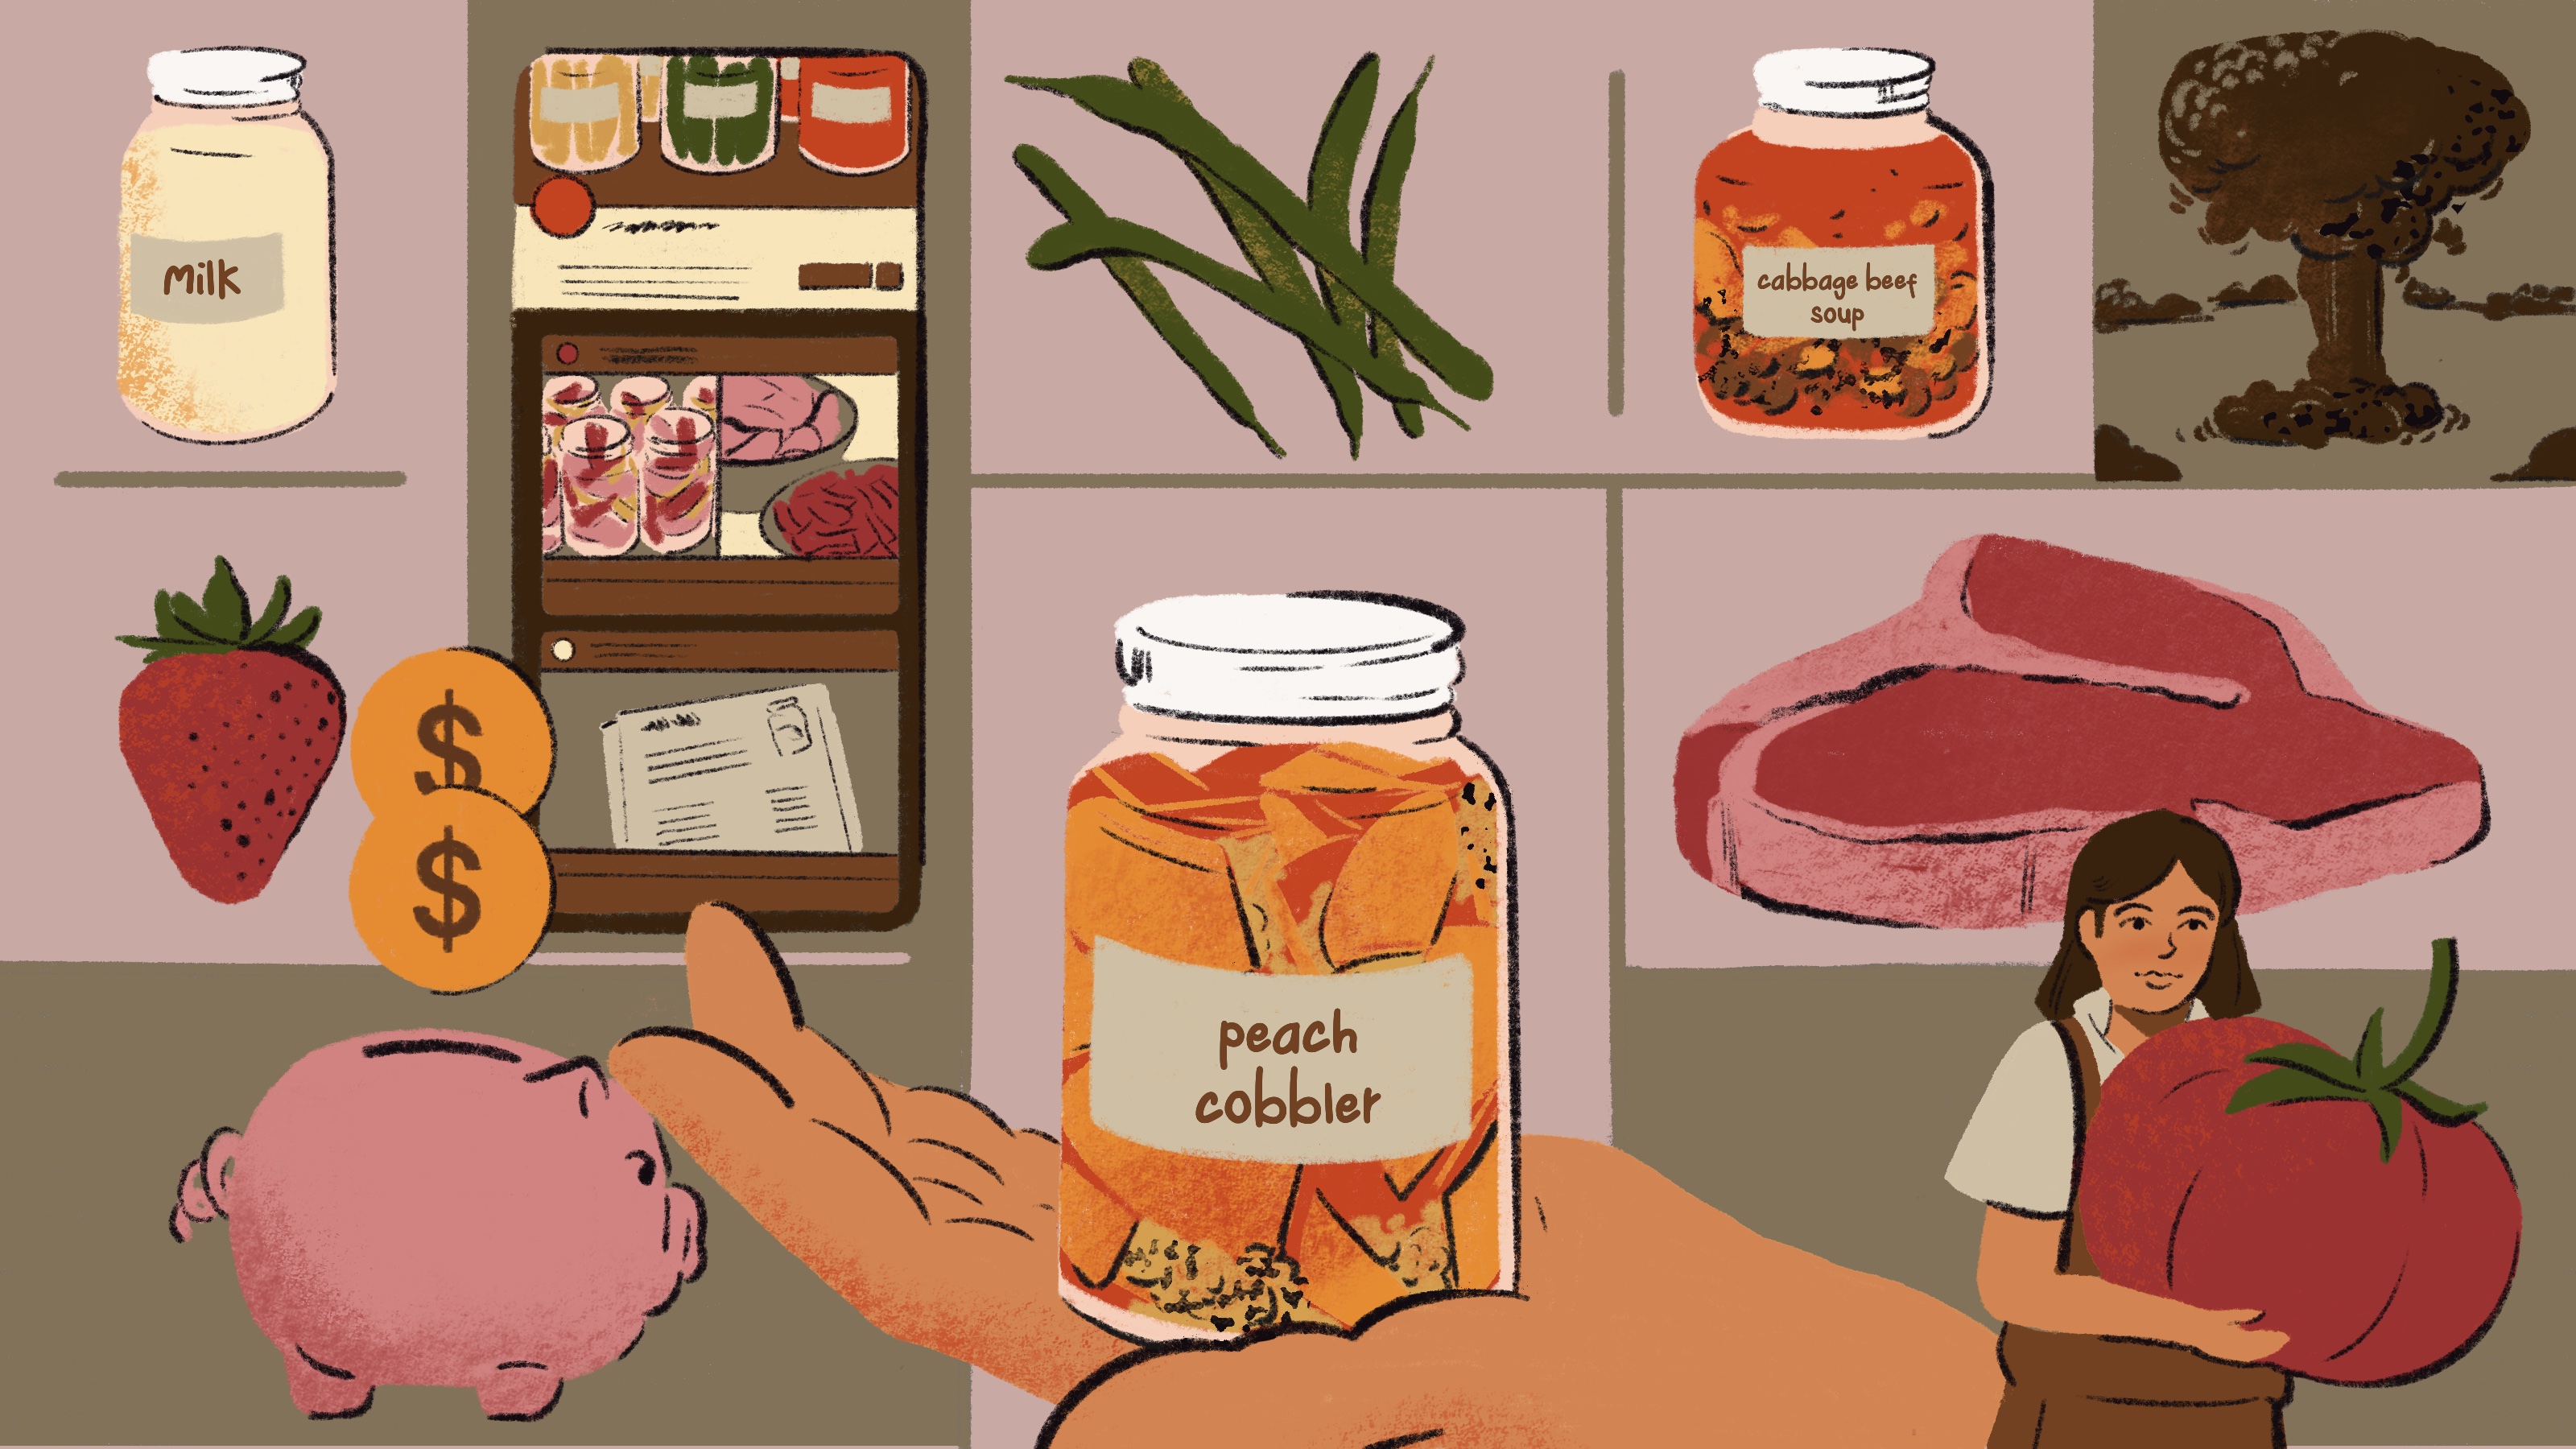 A grid depicting canned milk, canned peach cobbler, and canned cabbage beef soup, along with a mushroom cloud, raw steak, piggy bank, and woman holding a giant tomato. Illustration.